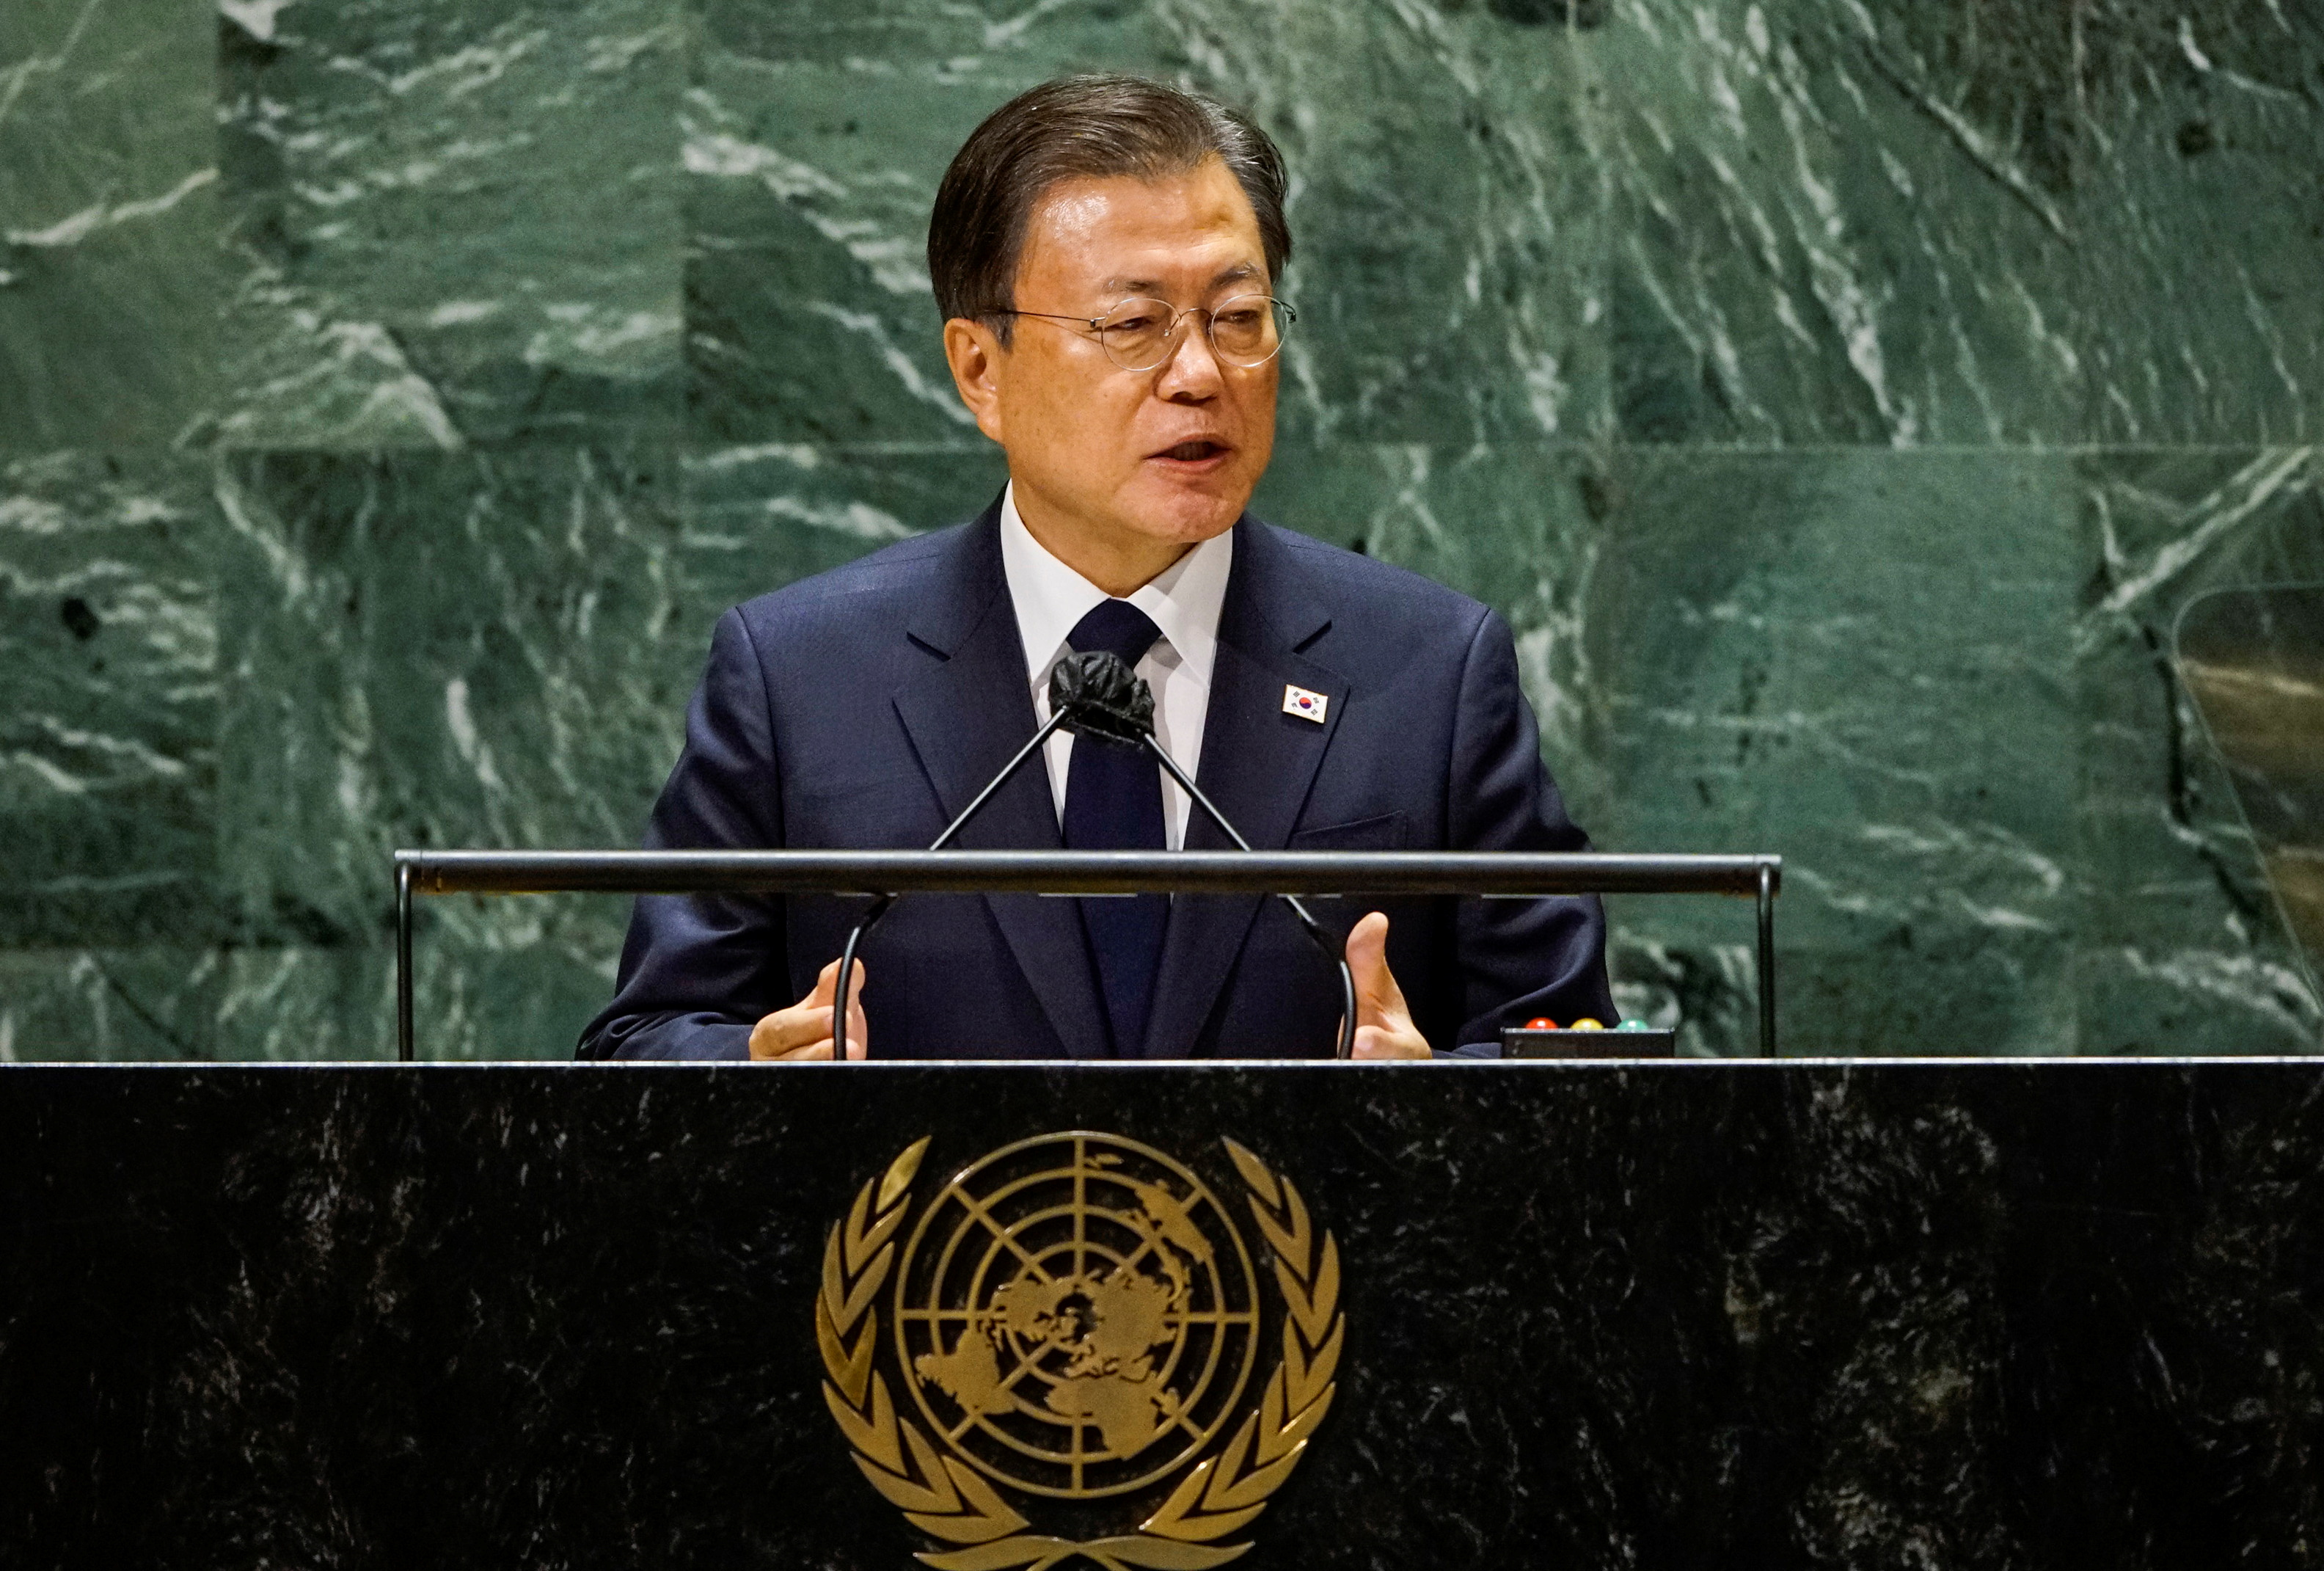 South Korea's President Moon Jae-in addresses 76th Session of the U.N. General Assembly in New York City